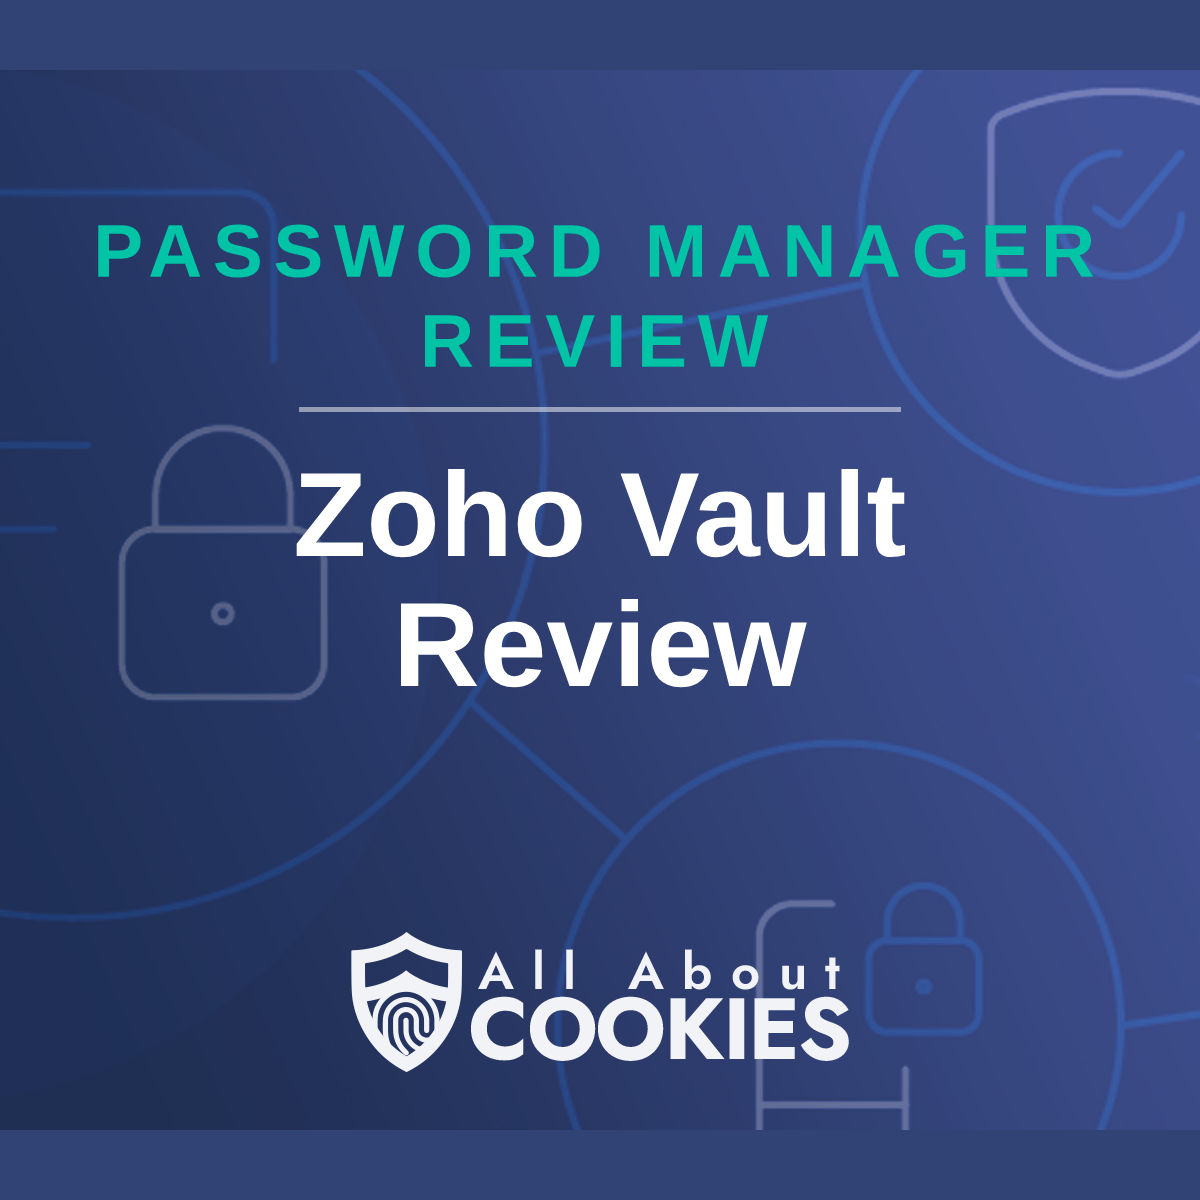 A blue background with images of locks and shields with the text &quot;Zoho Vault Review&quot; and the All About Cookies logo. 